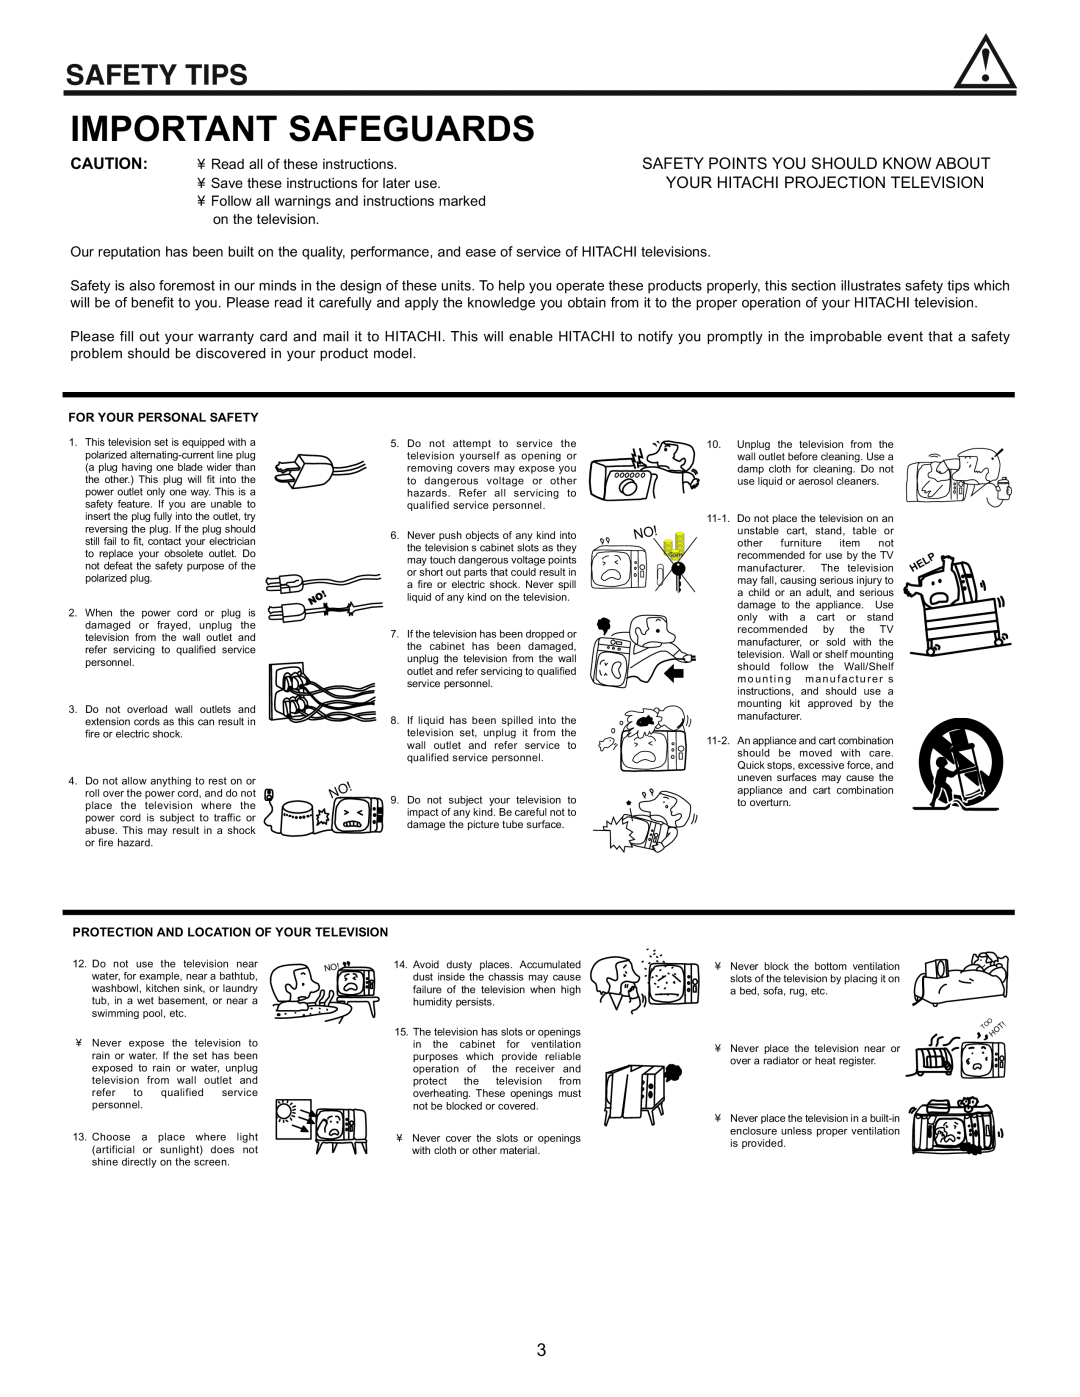 Hitachi 53SWX01W manual Safety Tips, Important Safeguards, ¥ Read all of these instructions, on the television 